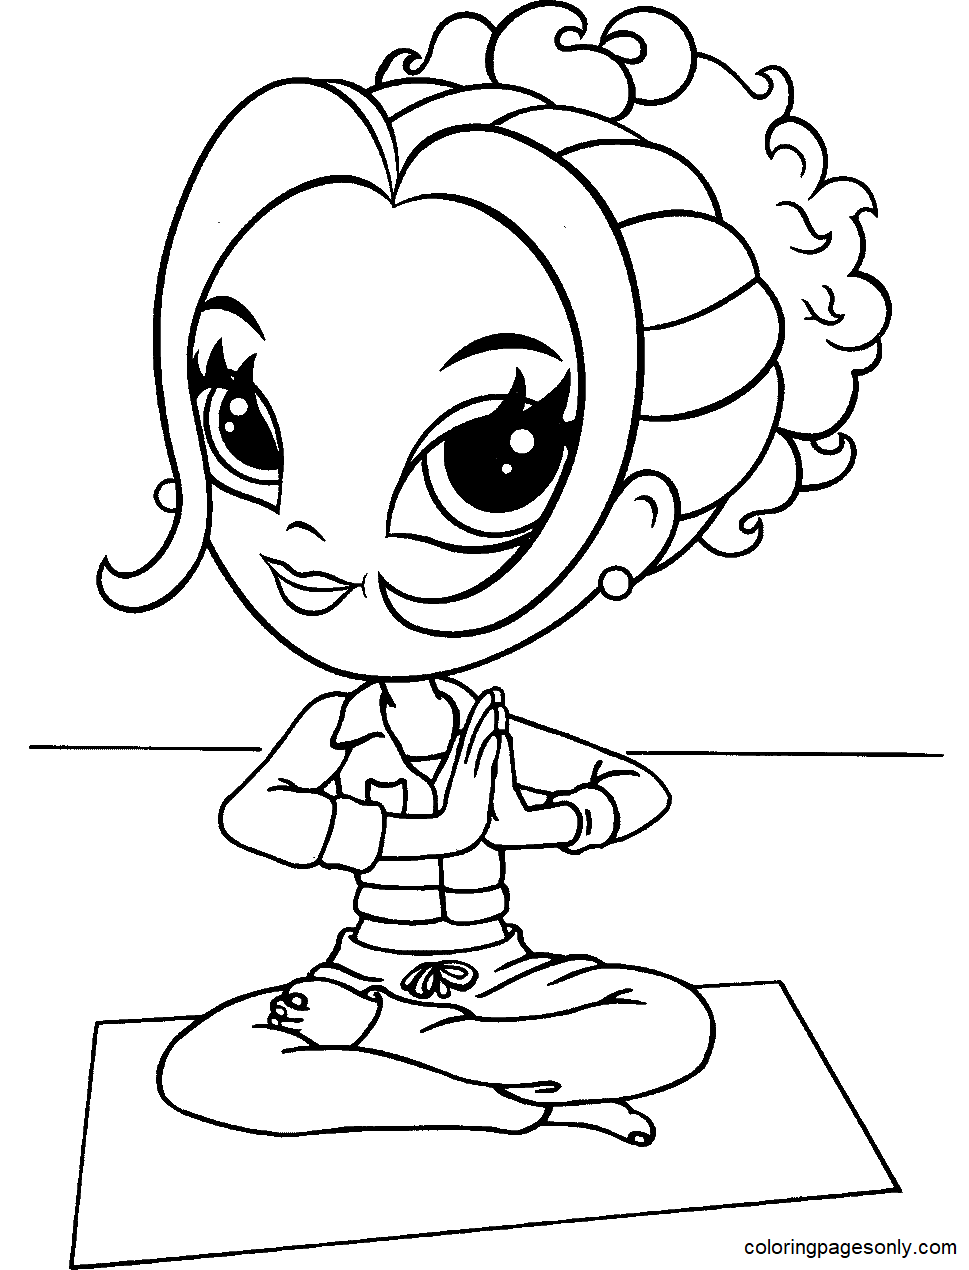 Yoga Coloring Pages - Free Printable Coloring Pages